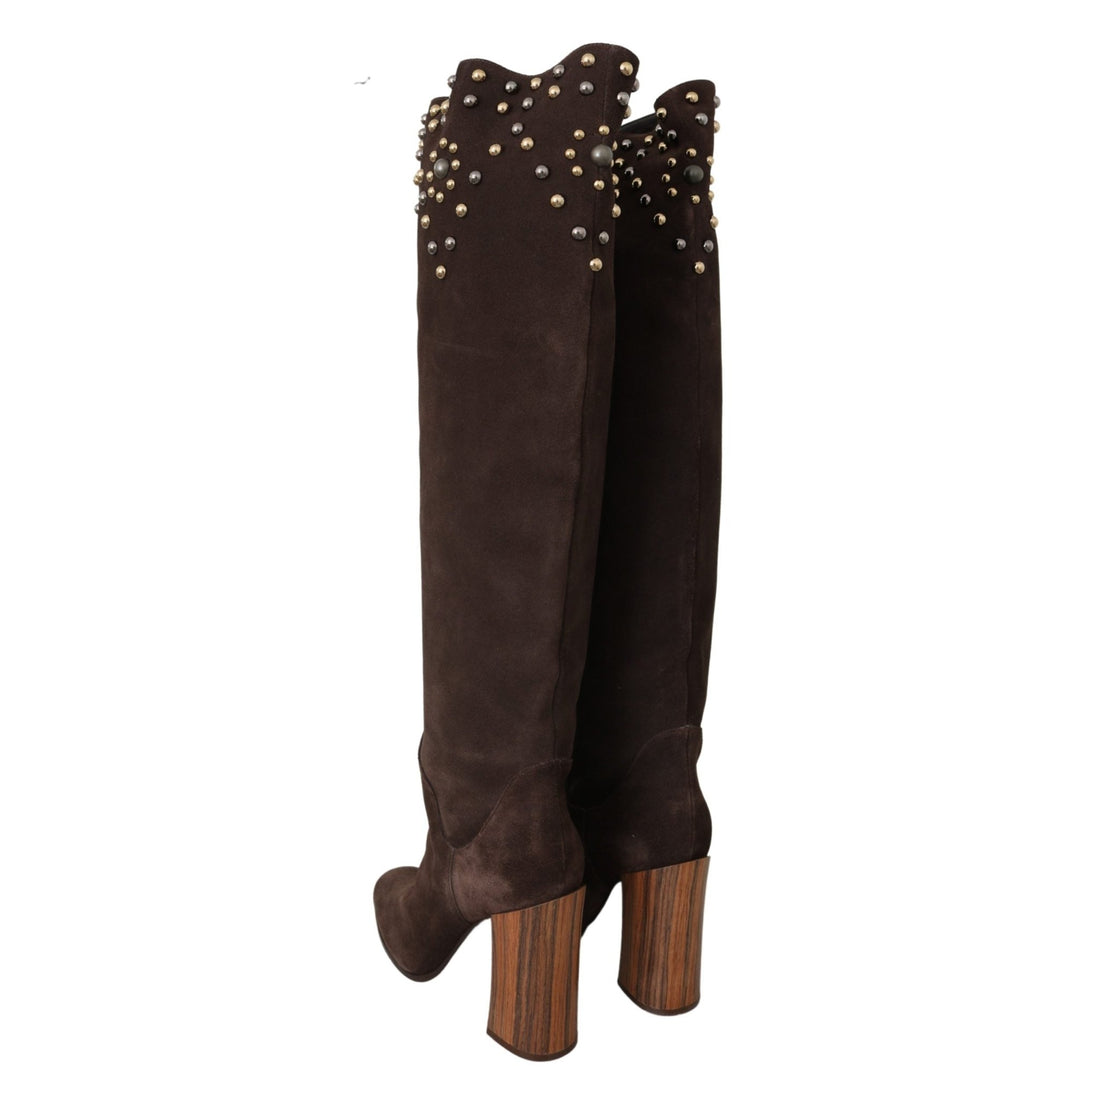 Dolce & Gabbana Brown Suede Studded Knee High Shoes Boots - Paris Deluxe